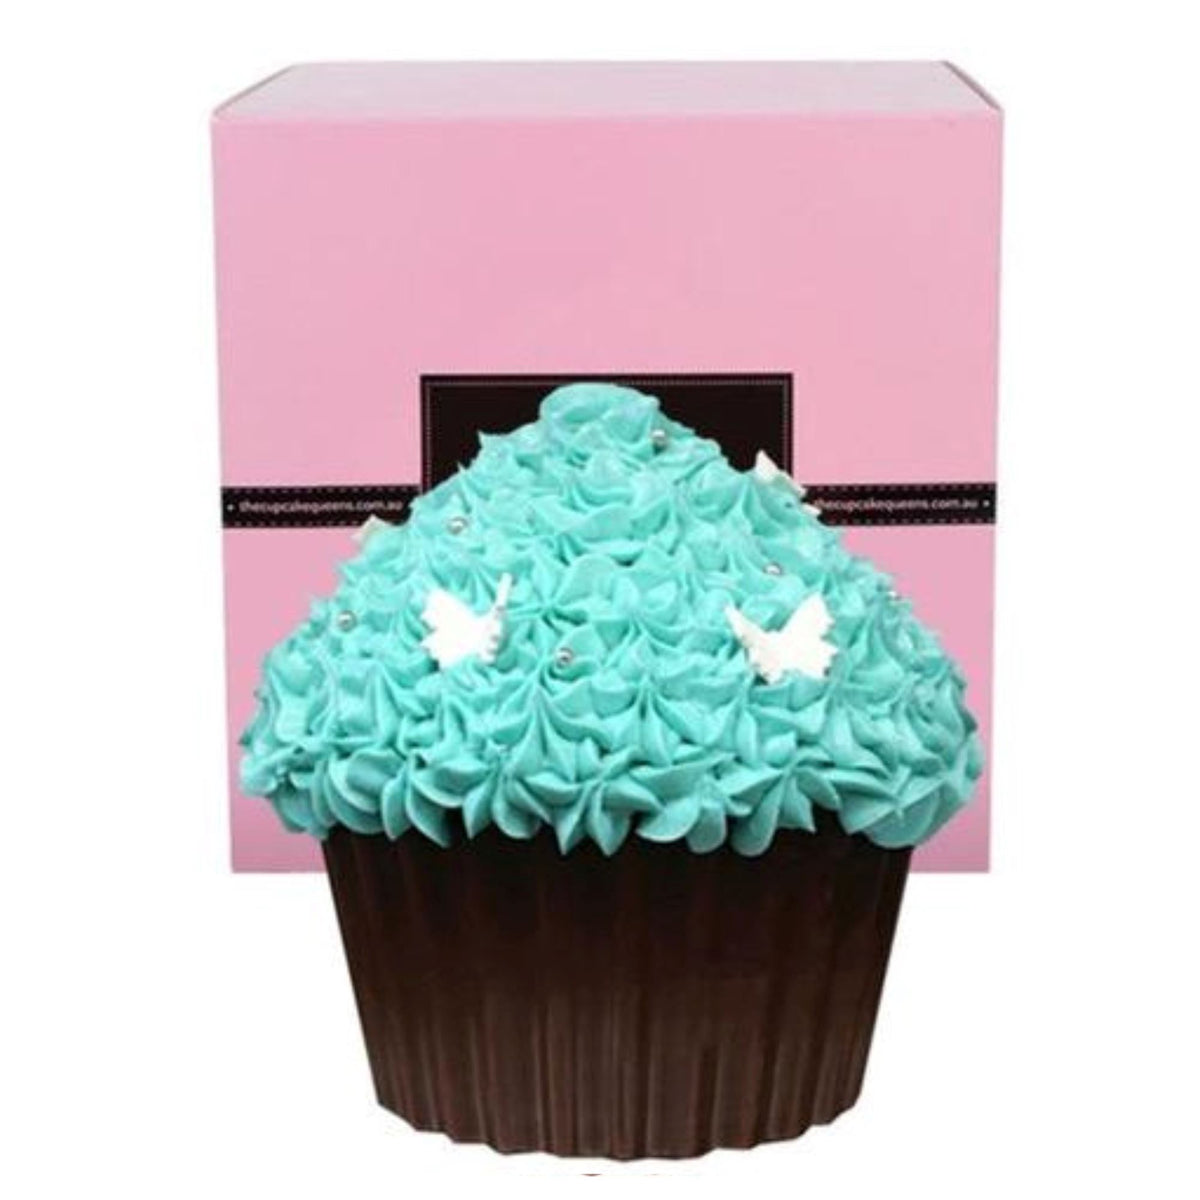 Tiffany Blue Chocolate Giant Cupcake with Butterflies Cakes The Cupcake Queens 